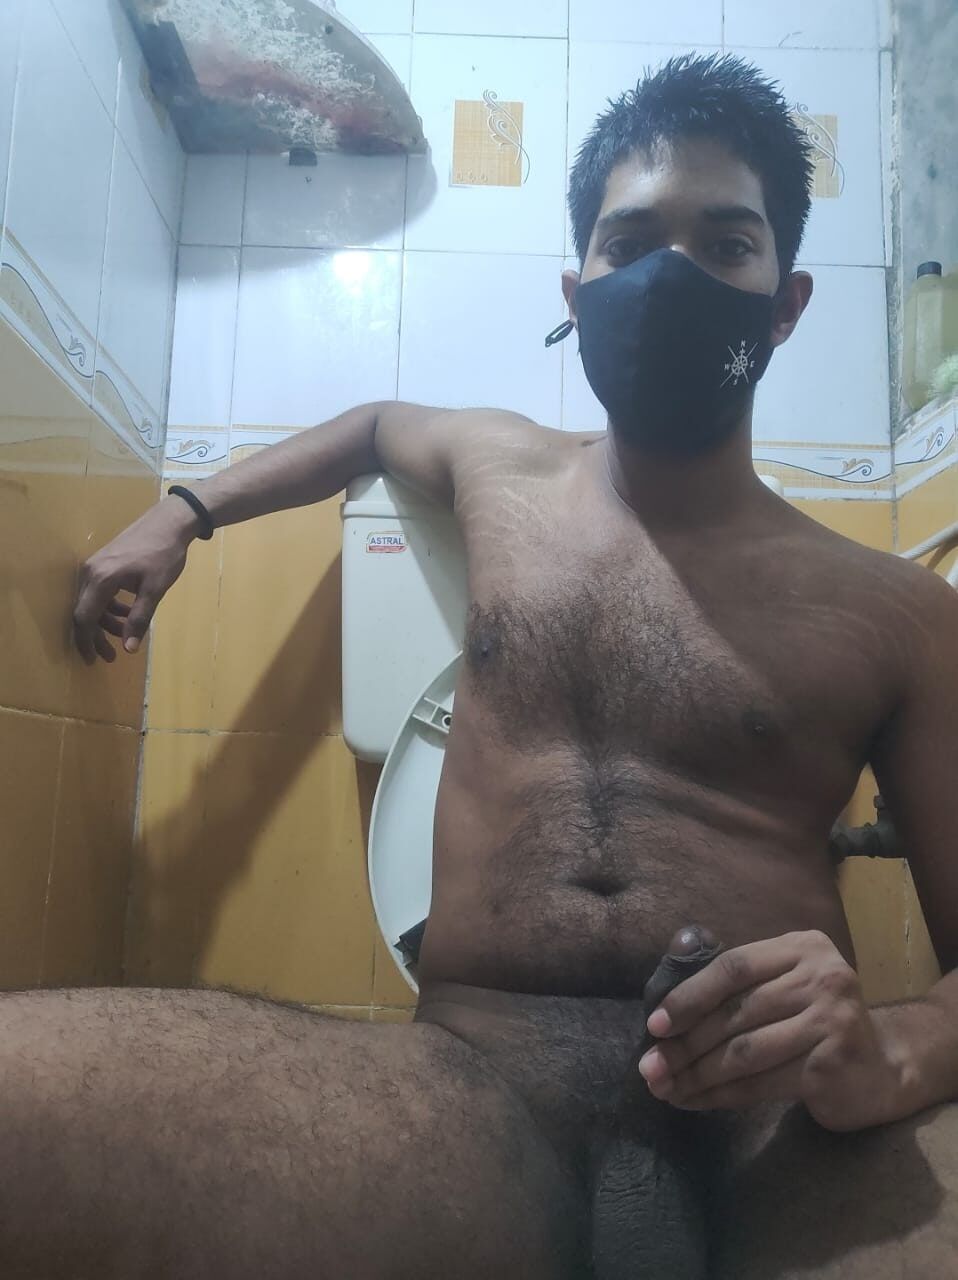 Nude Young Boy In Toilet Showing His Muscles & Penis